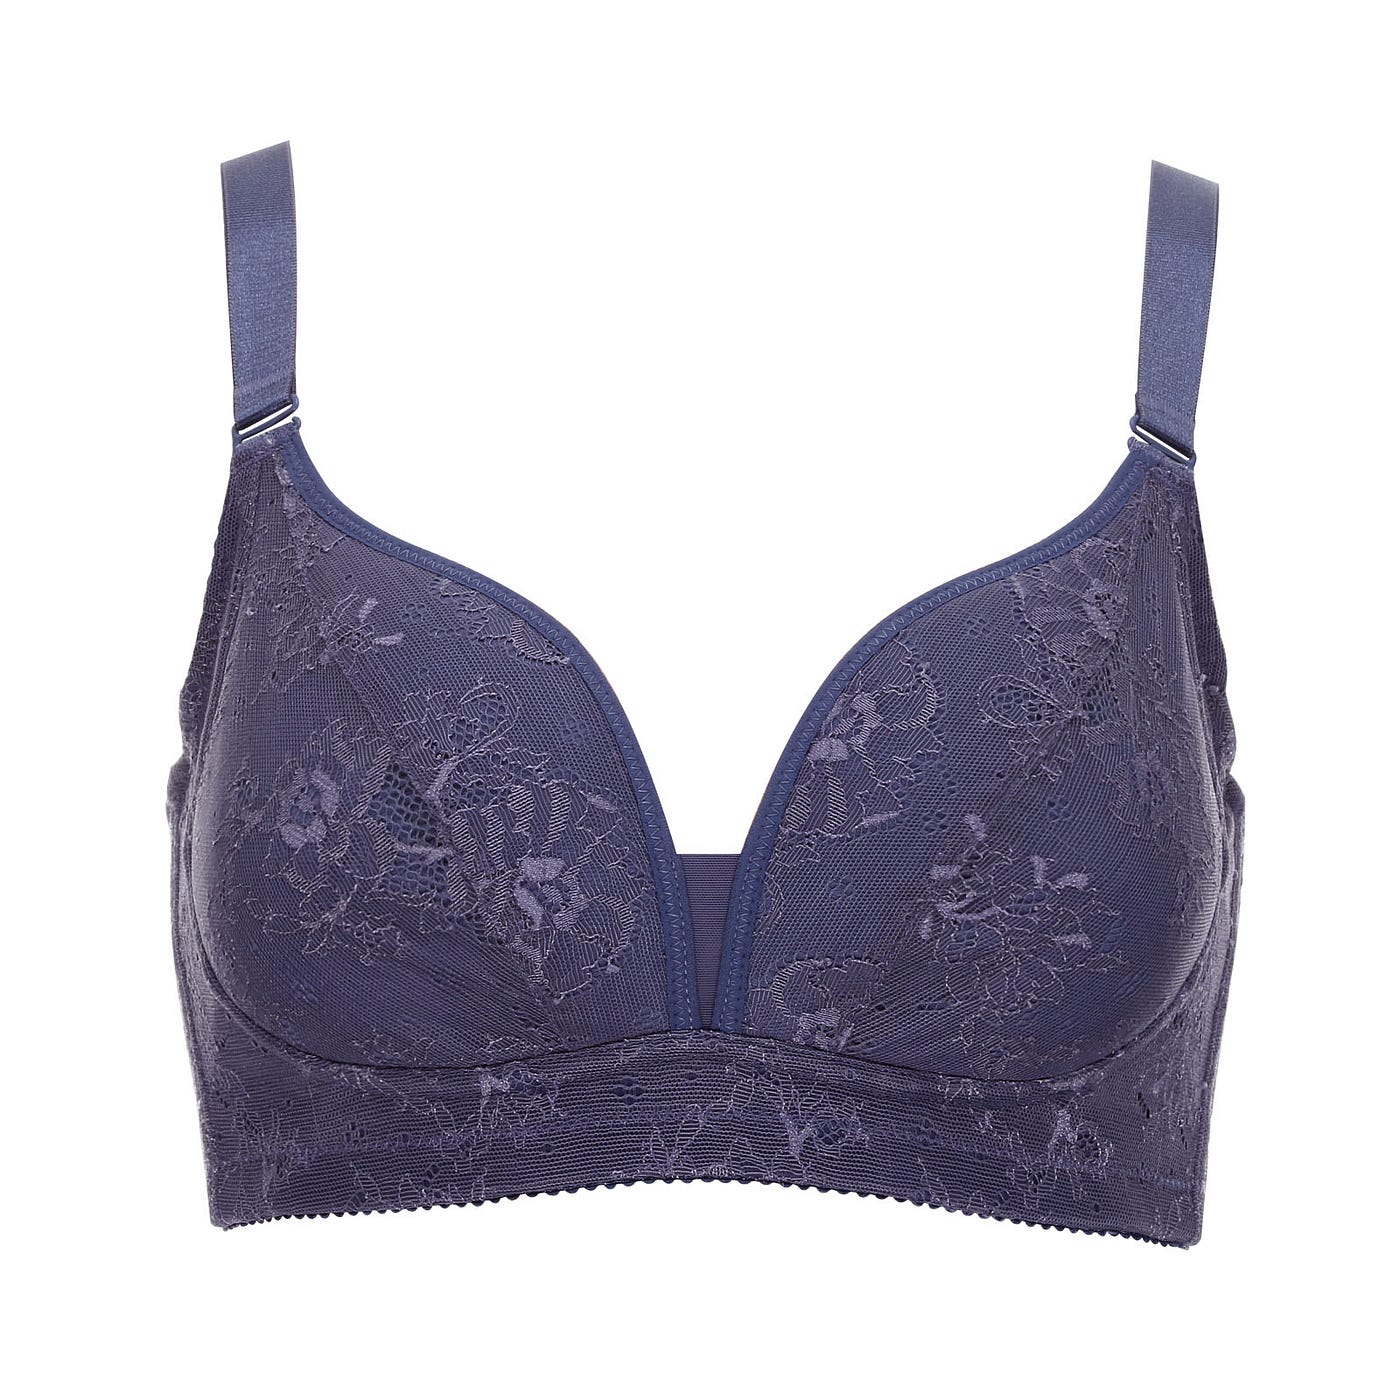 A Guide to Select the Ideal Bra for a Specific Cup Size, by Adelia Leow